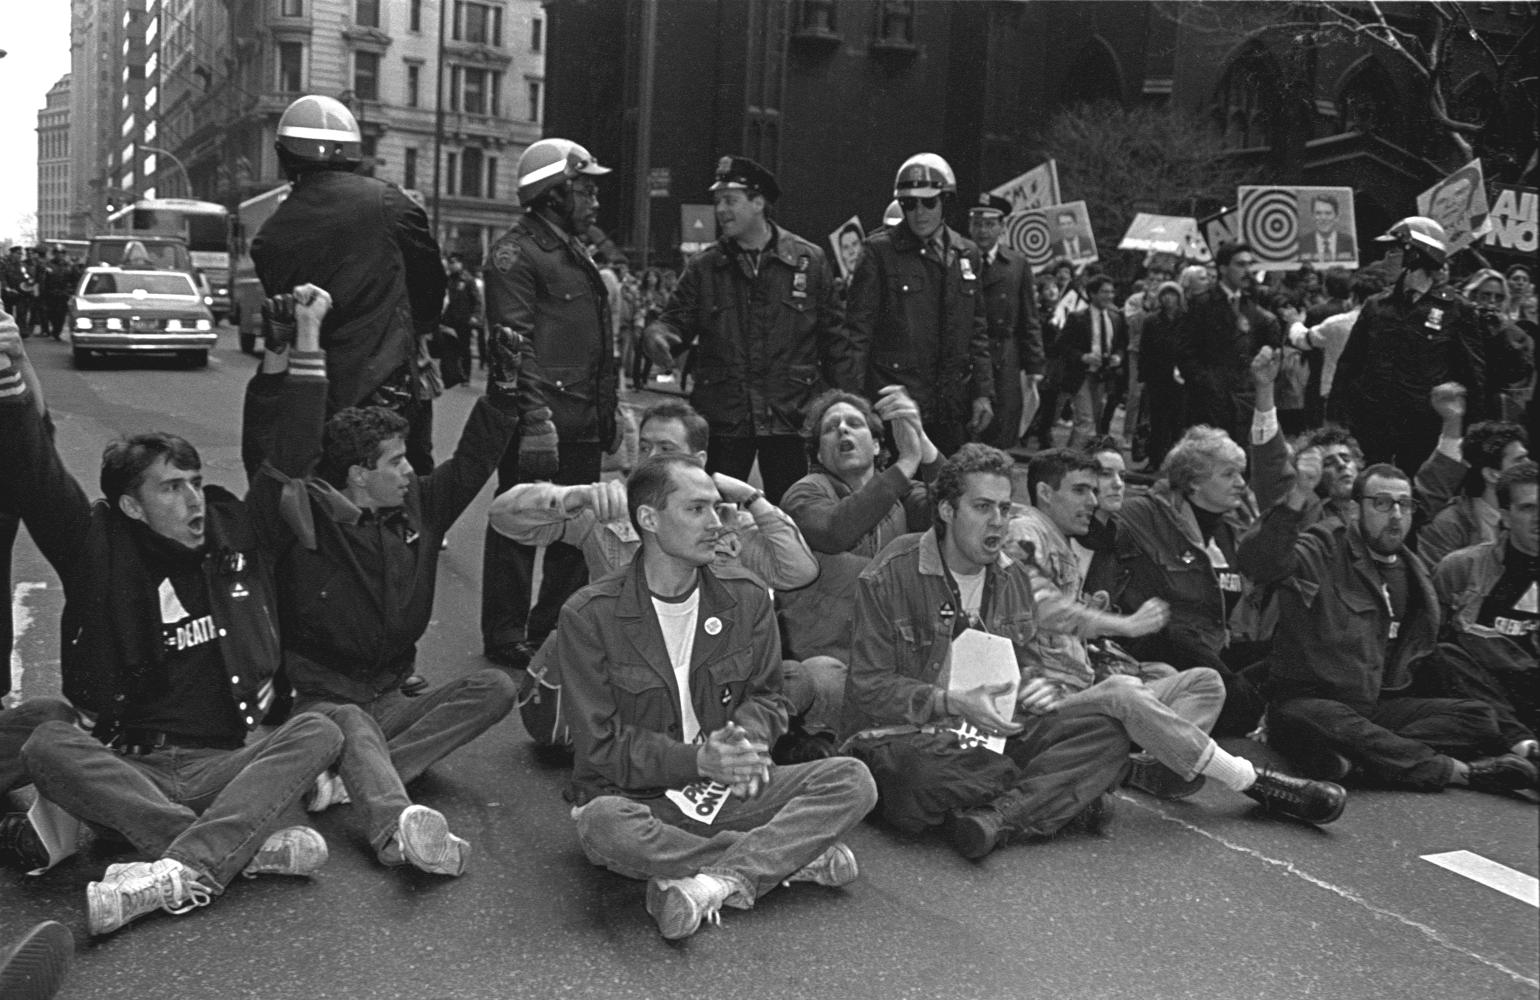 Black and white photo of demonstrators blocking street by sitting while a line of police stand behind them.